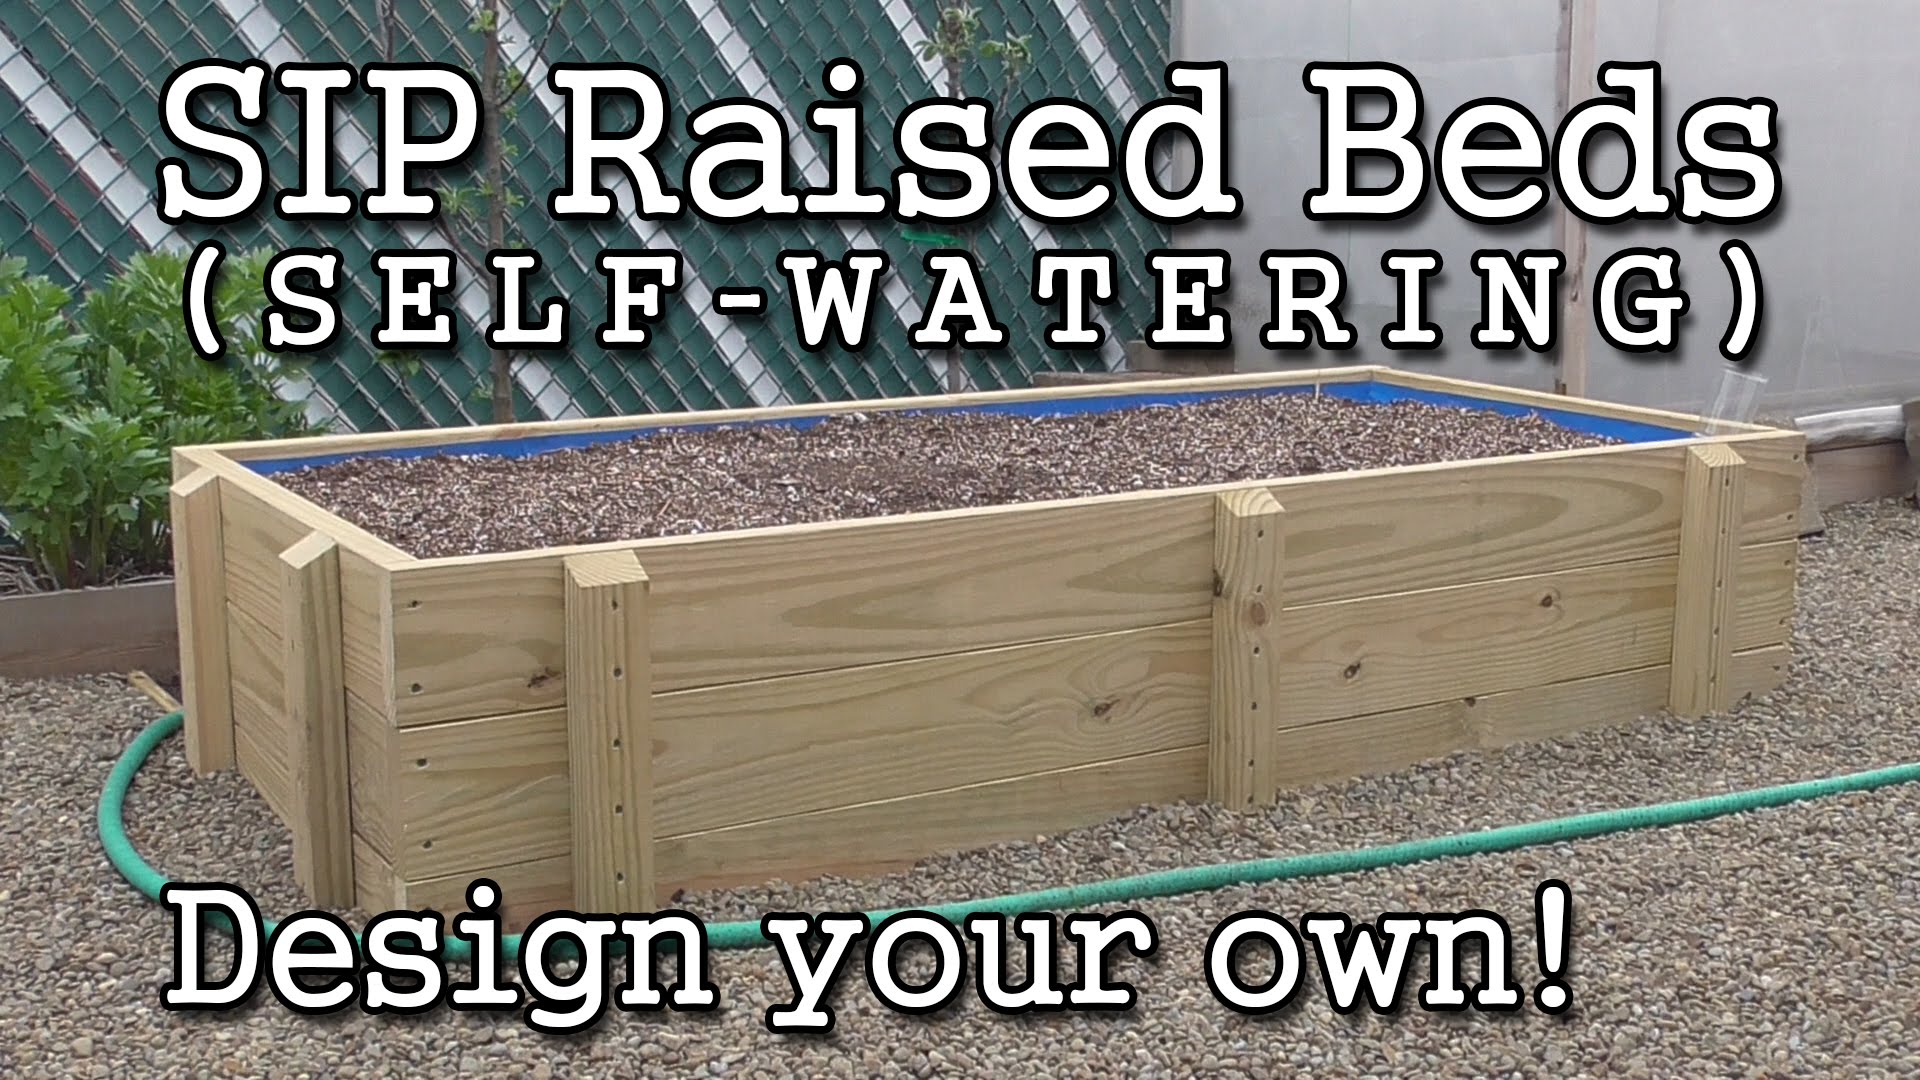 How To Build A Self-Watering Sub-Irrigated Raised Garden Bed...